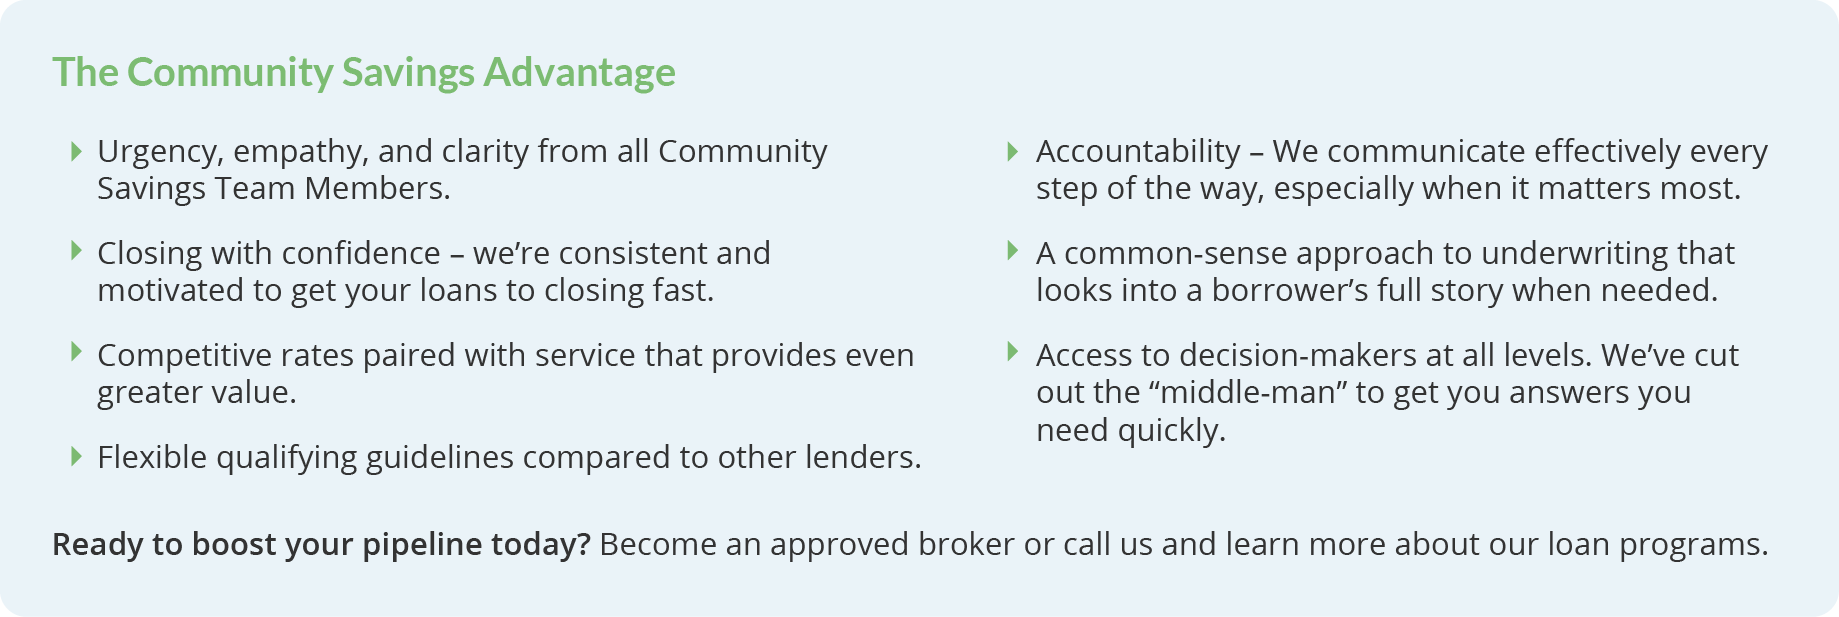 The Community Savings Advantage. Urgency, empathy, and clarity from all Community Savings Team Members. Closing with confidence – we’re consistent and motivated to get your loans to closing fast. Access to decision-makers at all levels. We’ve cut out the “middle-man” to get you answers you need quickly. Accountability – We communicate effectively every step of the way, especially when it matters most. Competitive rates paired with service that provides even greater value. A common-sense approach to underwriting that looks into a borrower’s full story when needed. Flexible qualifying guidelines compared to other lenders. Ready to boost your pipeline today? Become an approved broker or call us and learn more about our loan programs. 